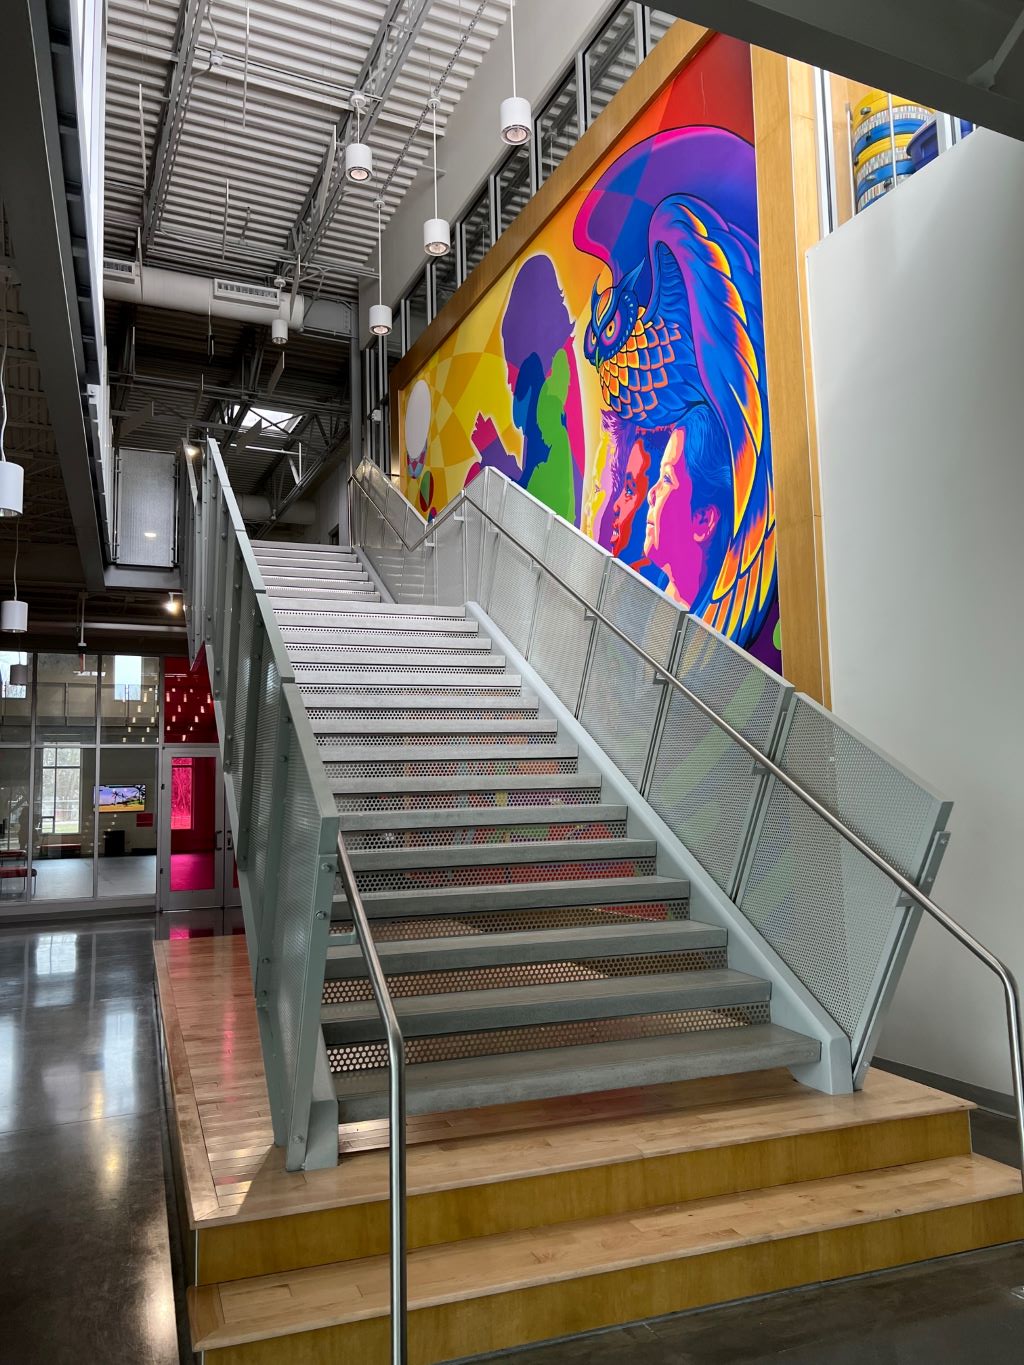 A wide metal staircase on a wooden platform runs along a wall covered in a large colorful mural. 